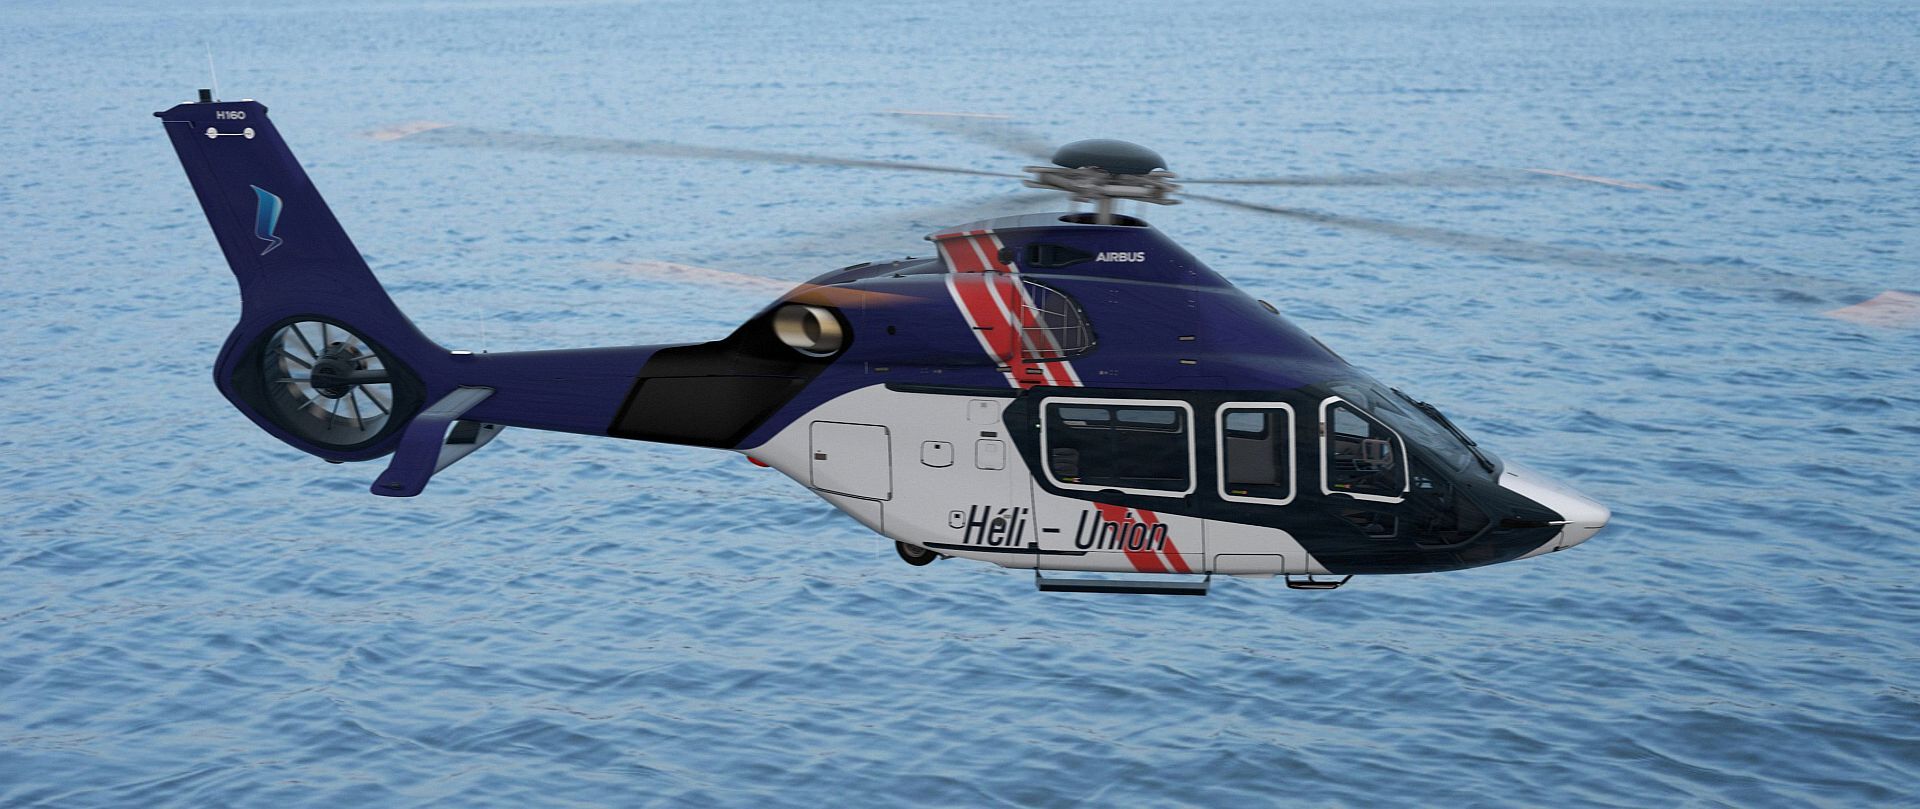 H Li Union To Purchase Two Airbus H160 Helicopters